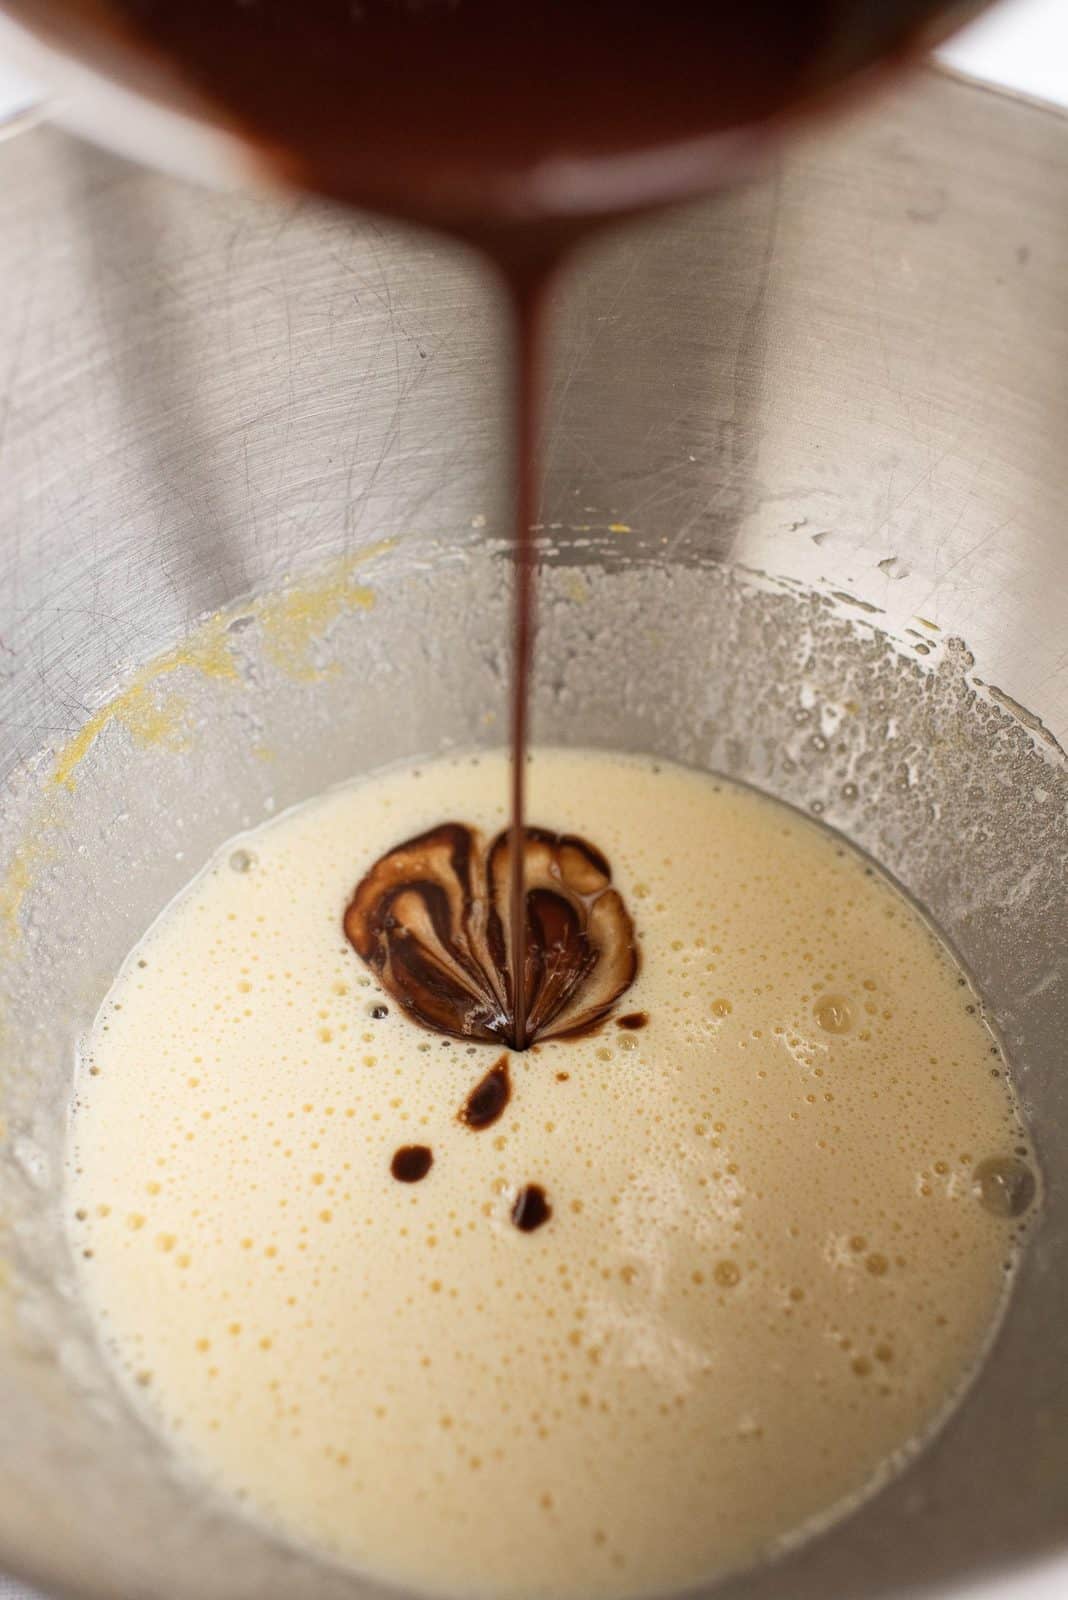 Chocolate mixture, sugar, vanilla, and eggs being beaten together in body of stand mixer.